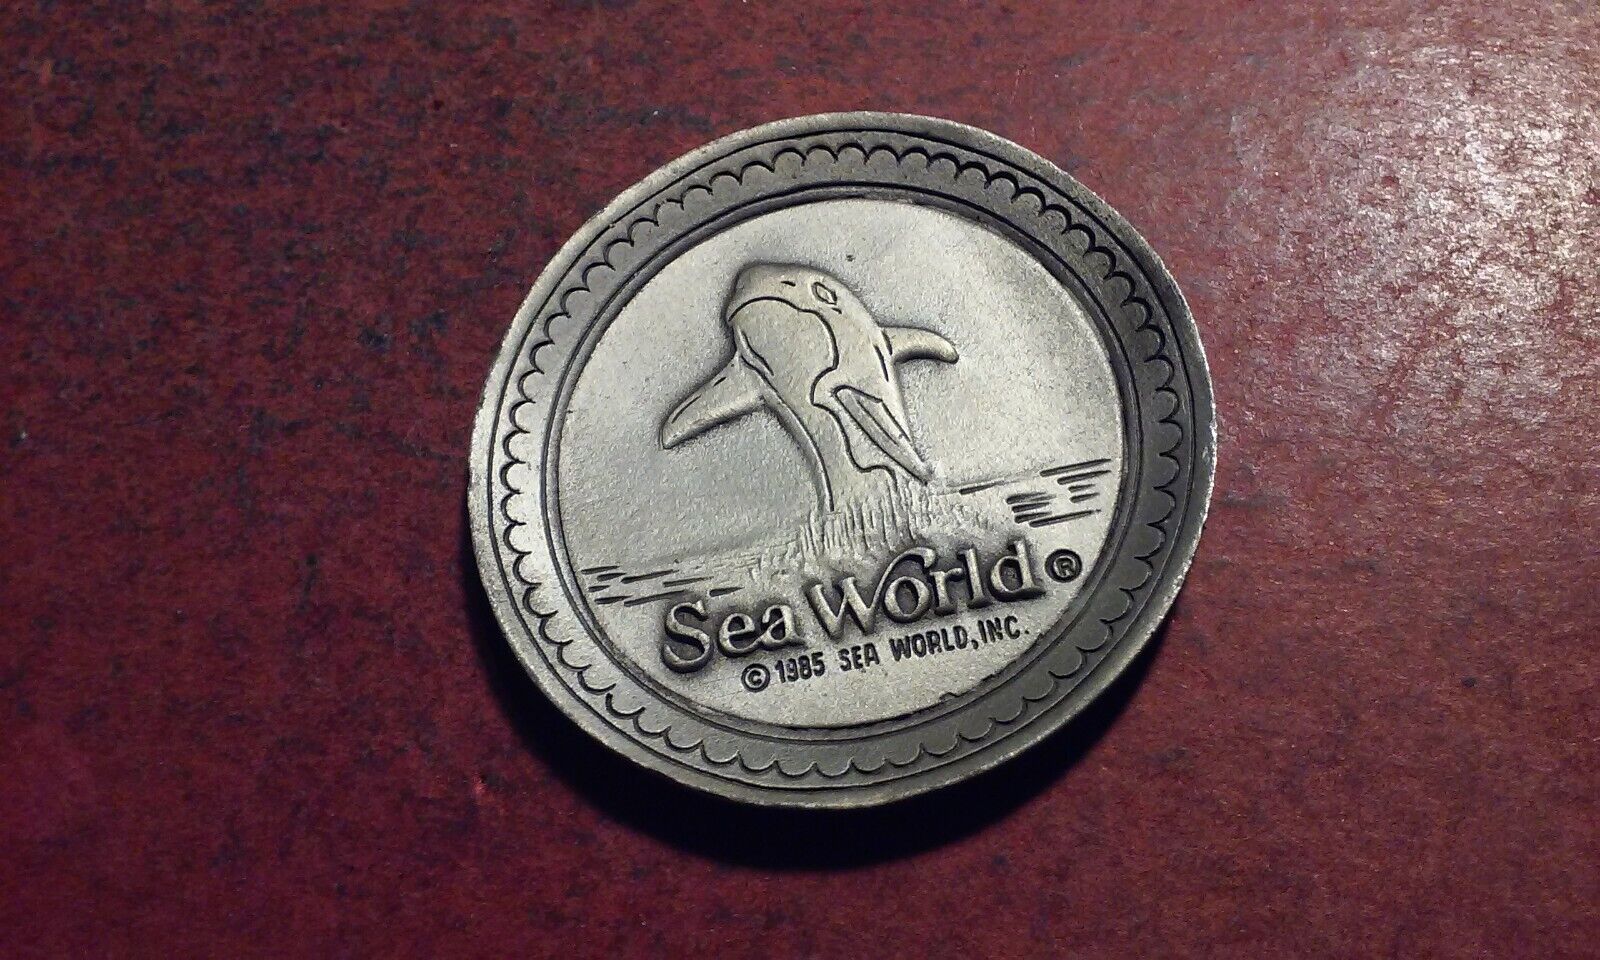 Cute 1985 SEA WORLD MINI PEWTER SOUVENIR PLATE by Pewter Fort 1-3/4ths\